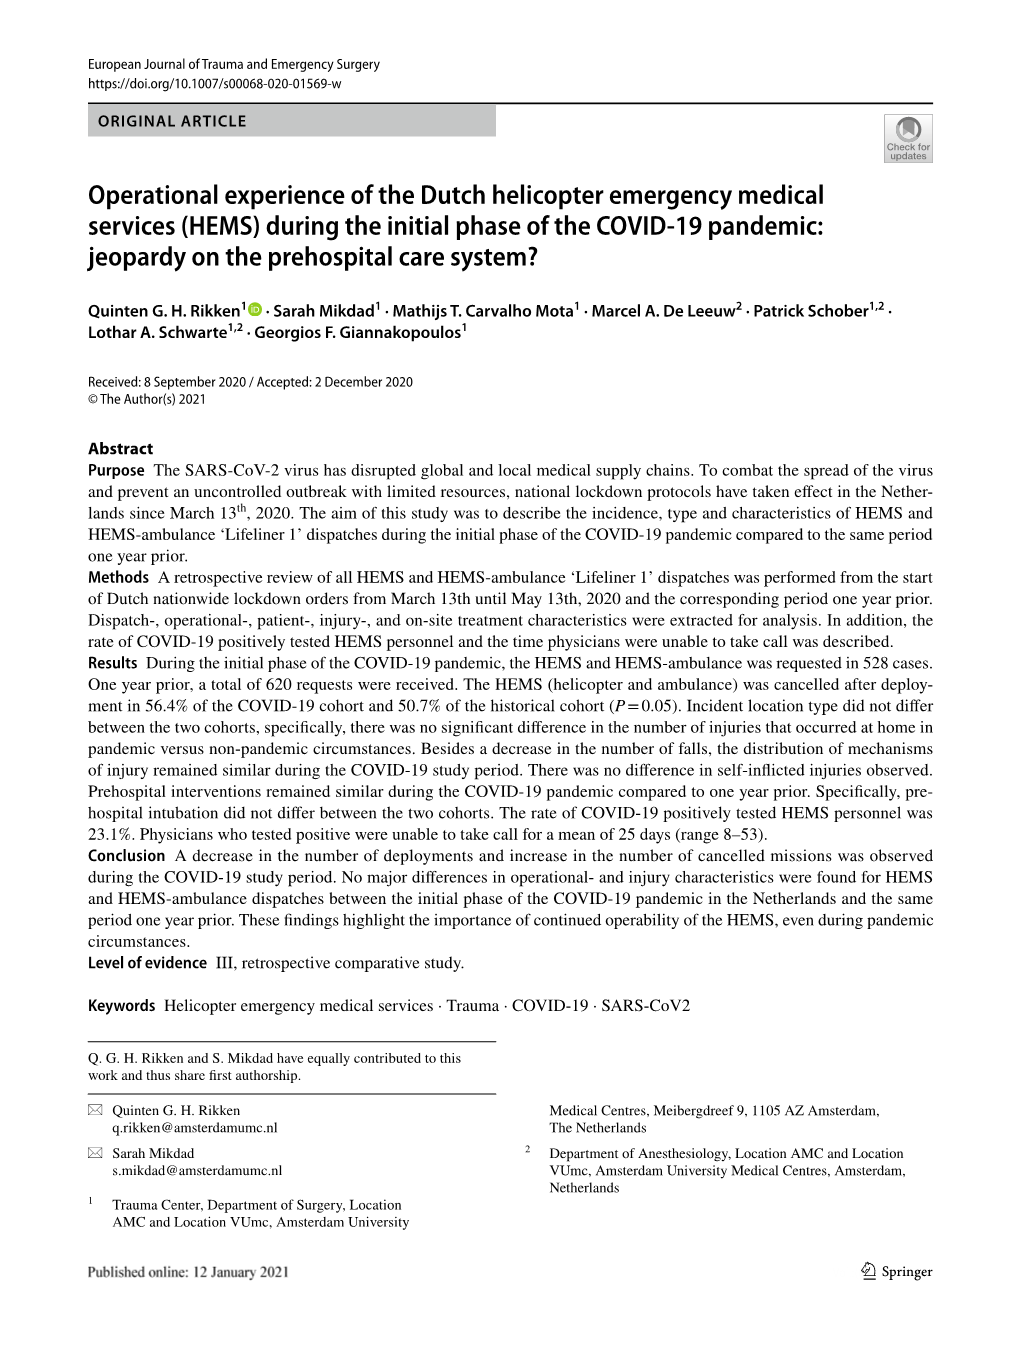 Operational Experience of the Dutch Helicopter Emergency Medical Services (HEMS) During the Initial Phase of the COVID-19 Pandem